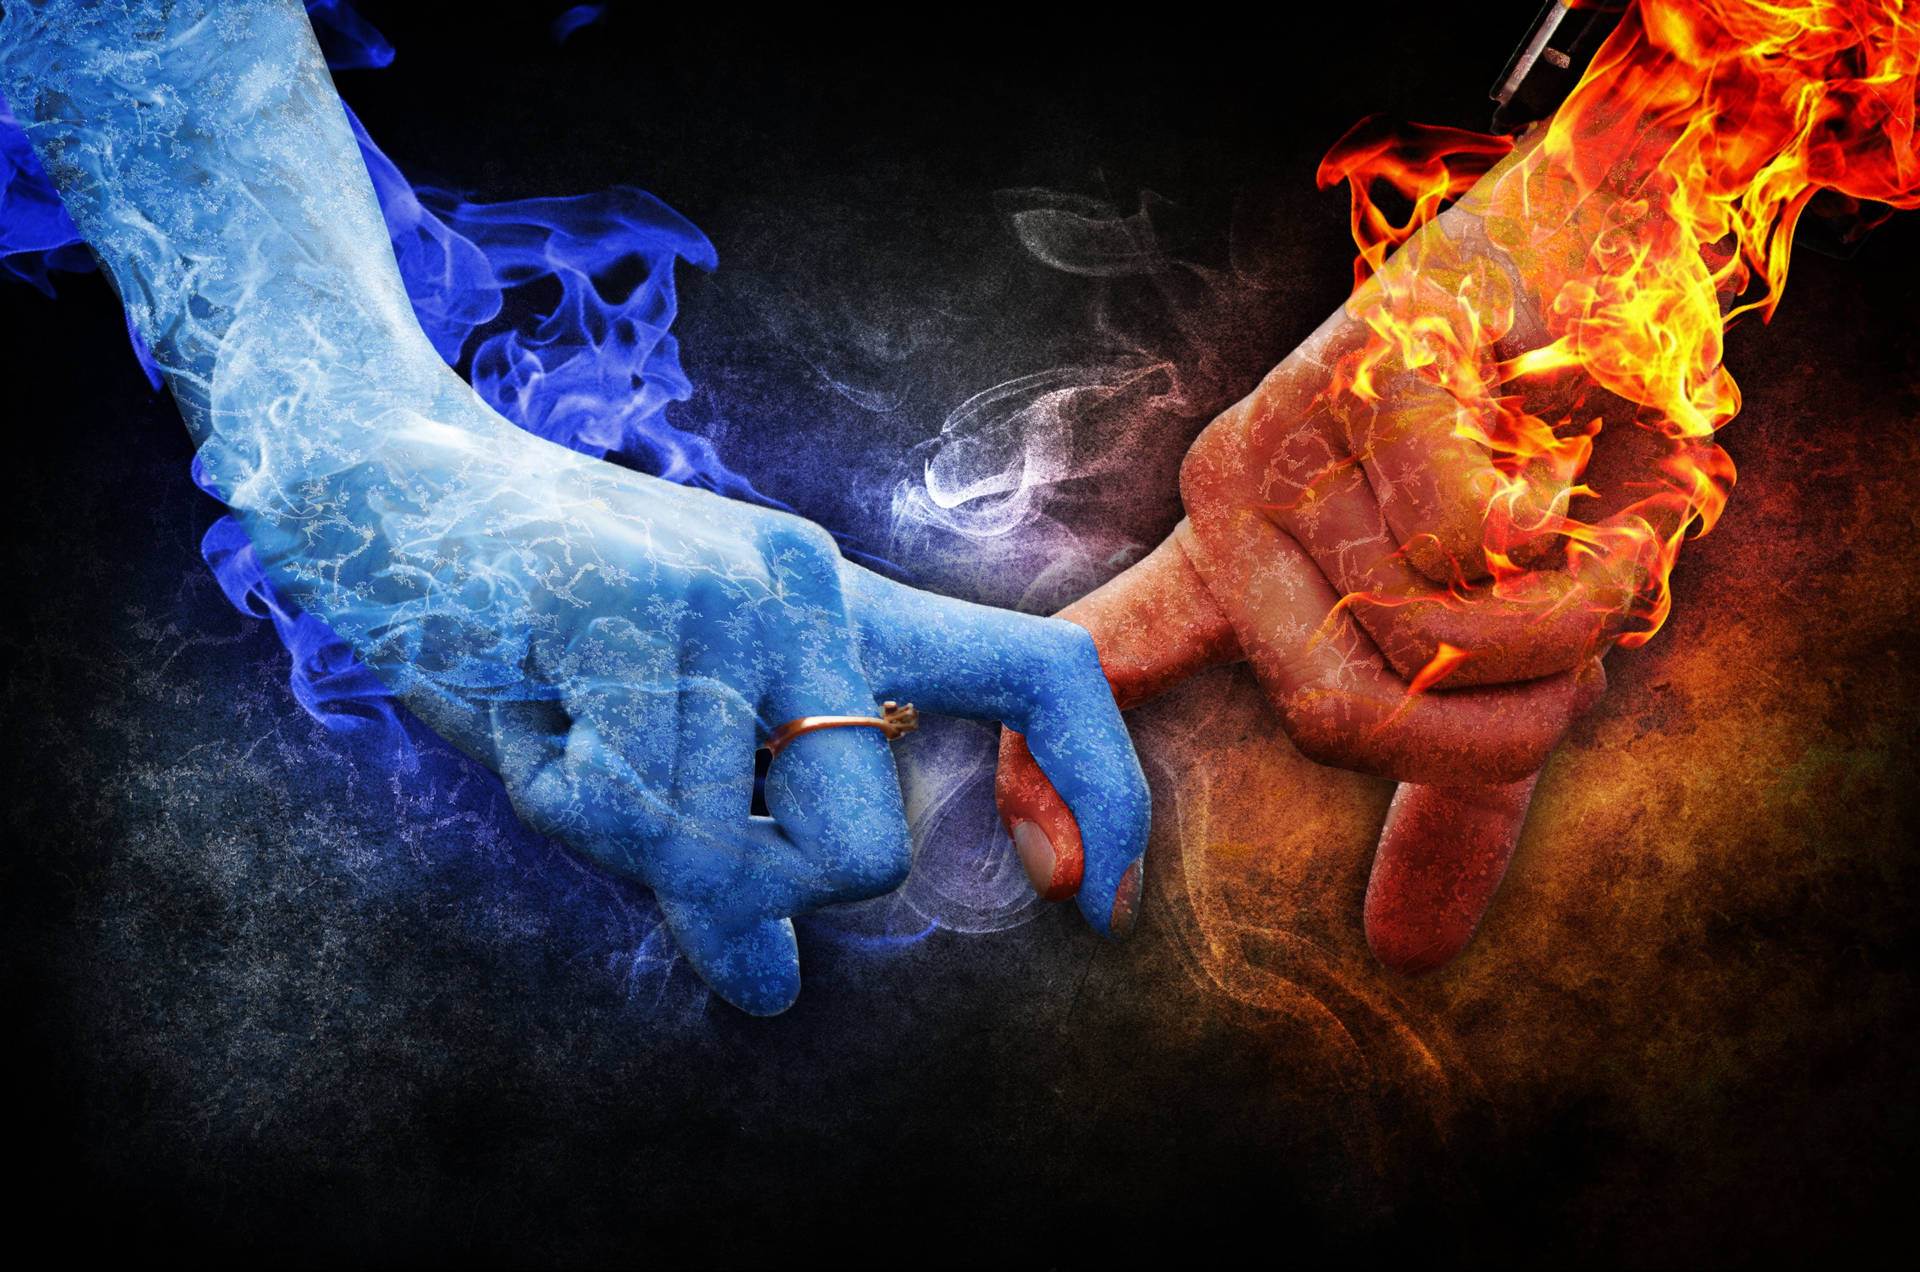 fire and ice hands wallpaper